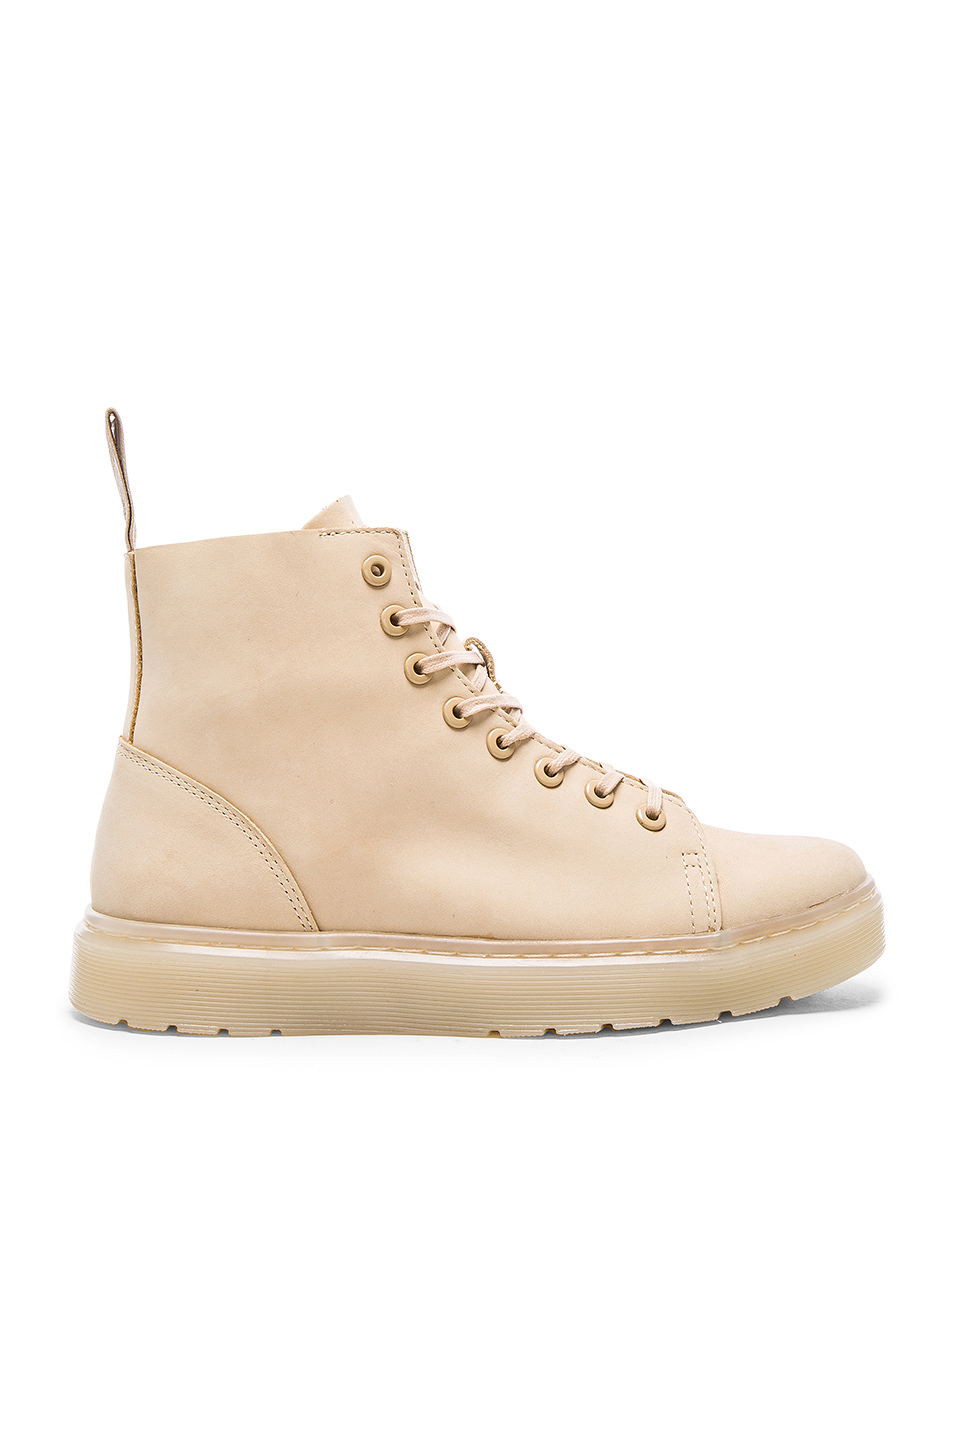 Dr. Martens Talib 8 Eye Raw Boot in Sand (Natural) - Lyst